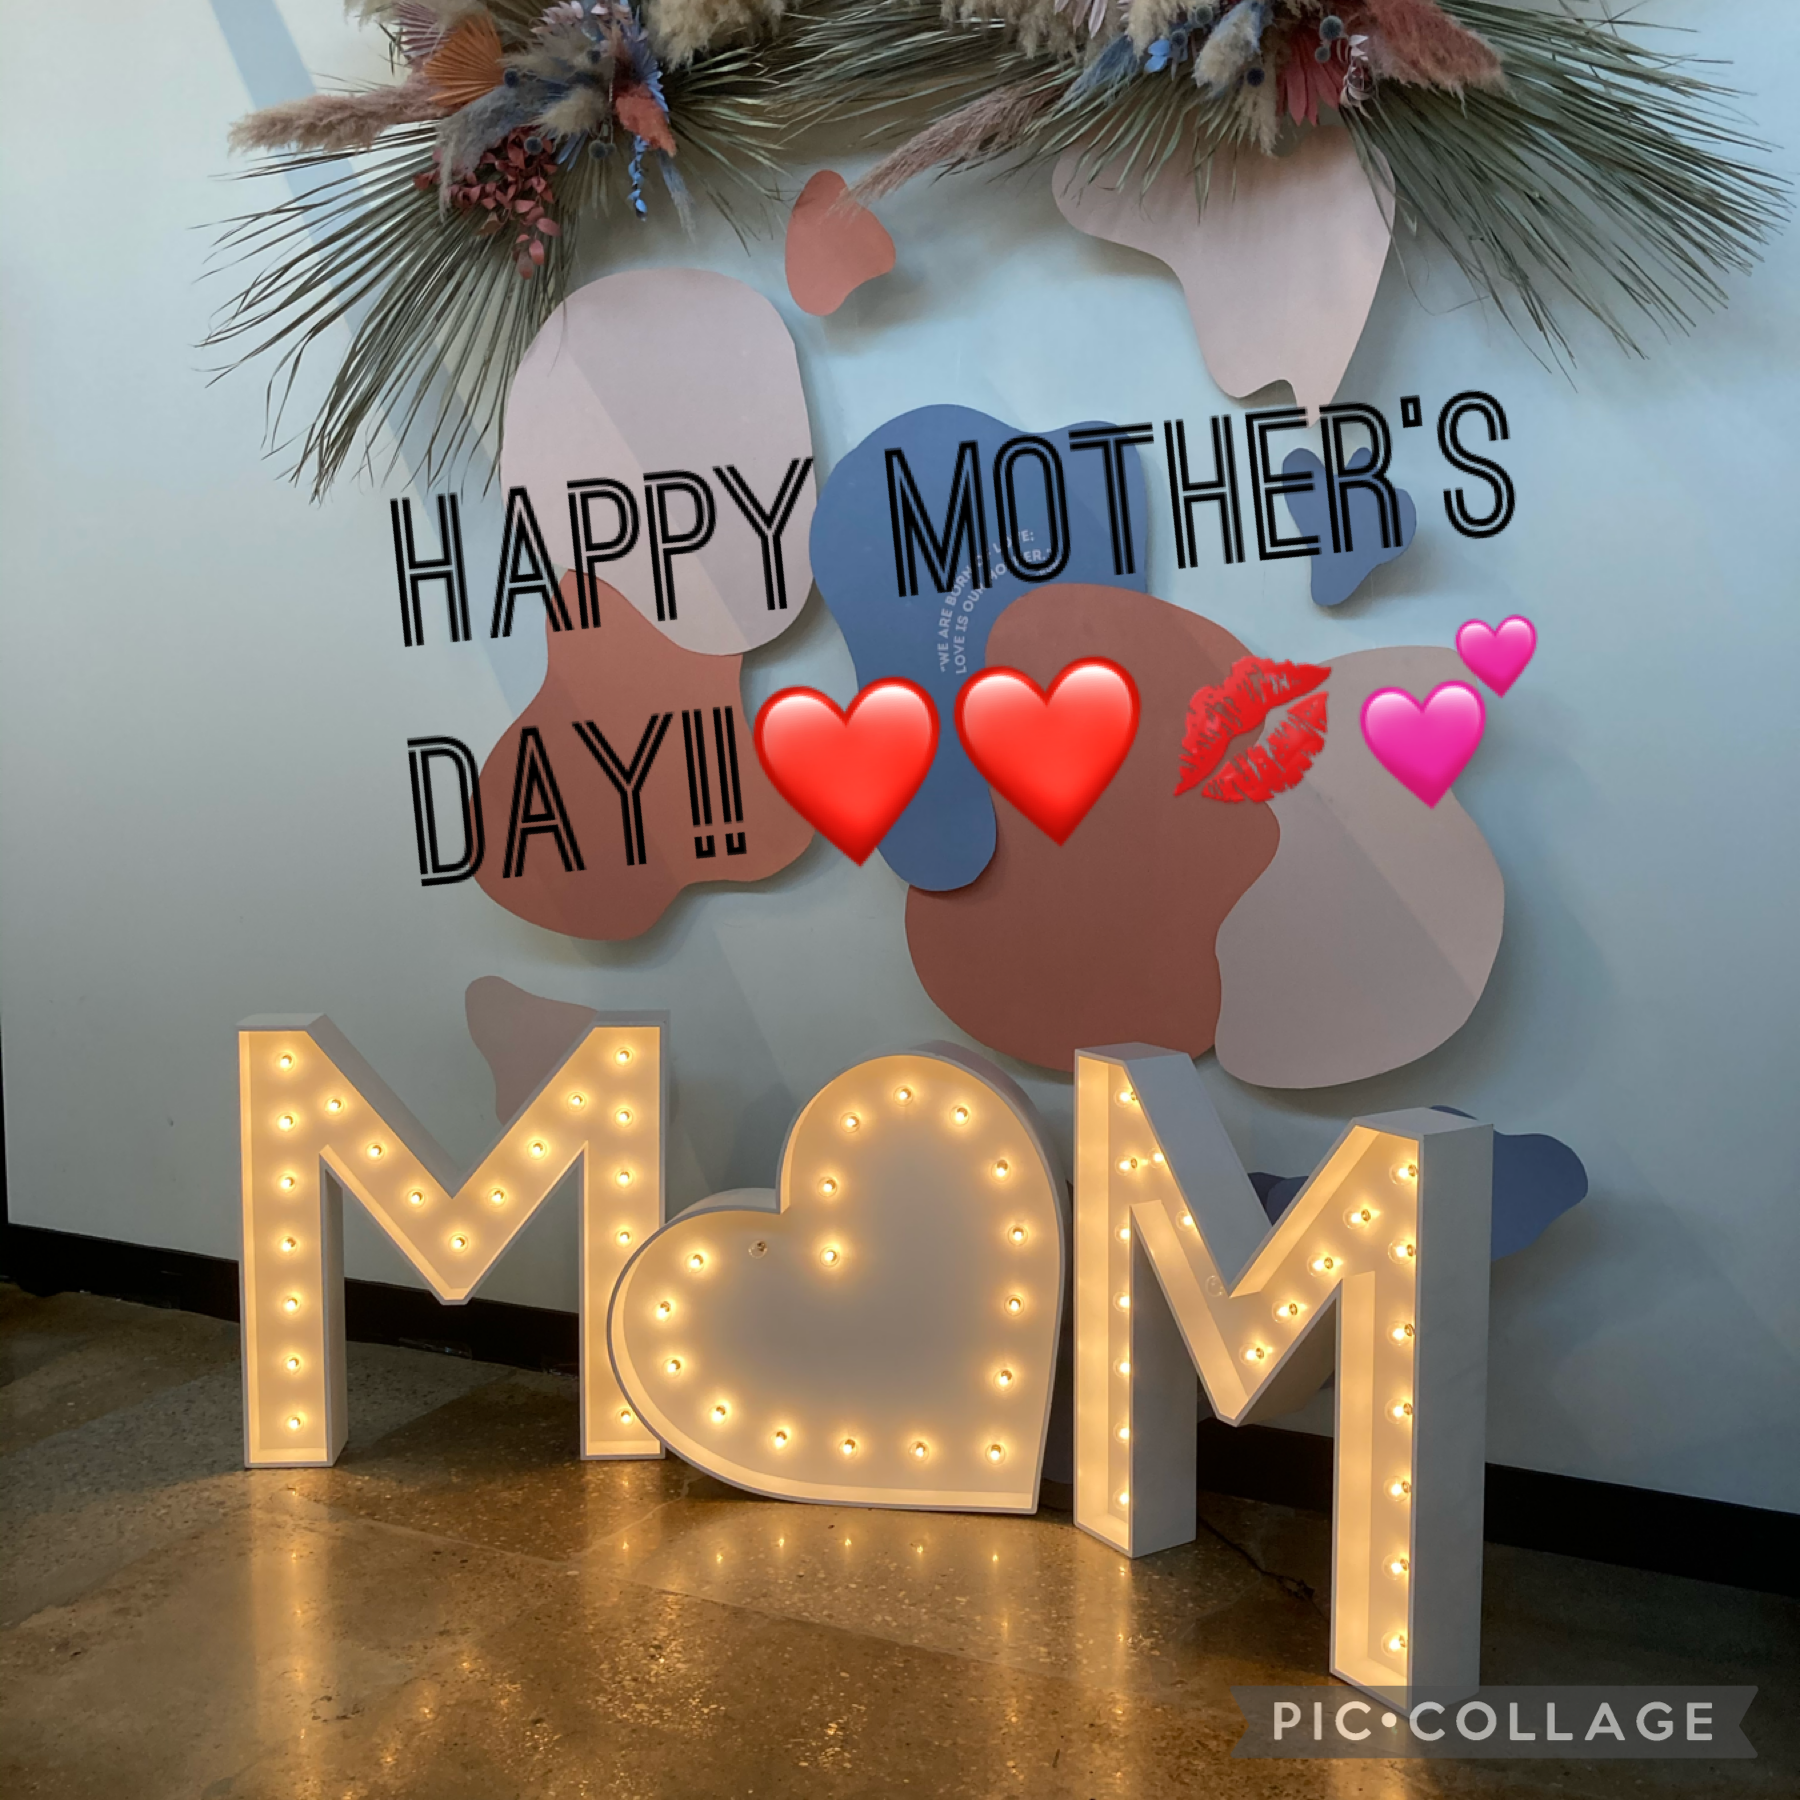 Happy mother’s day y’all!!😍😍😍🥰🥰🥰